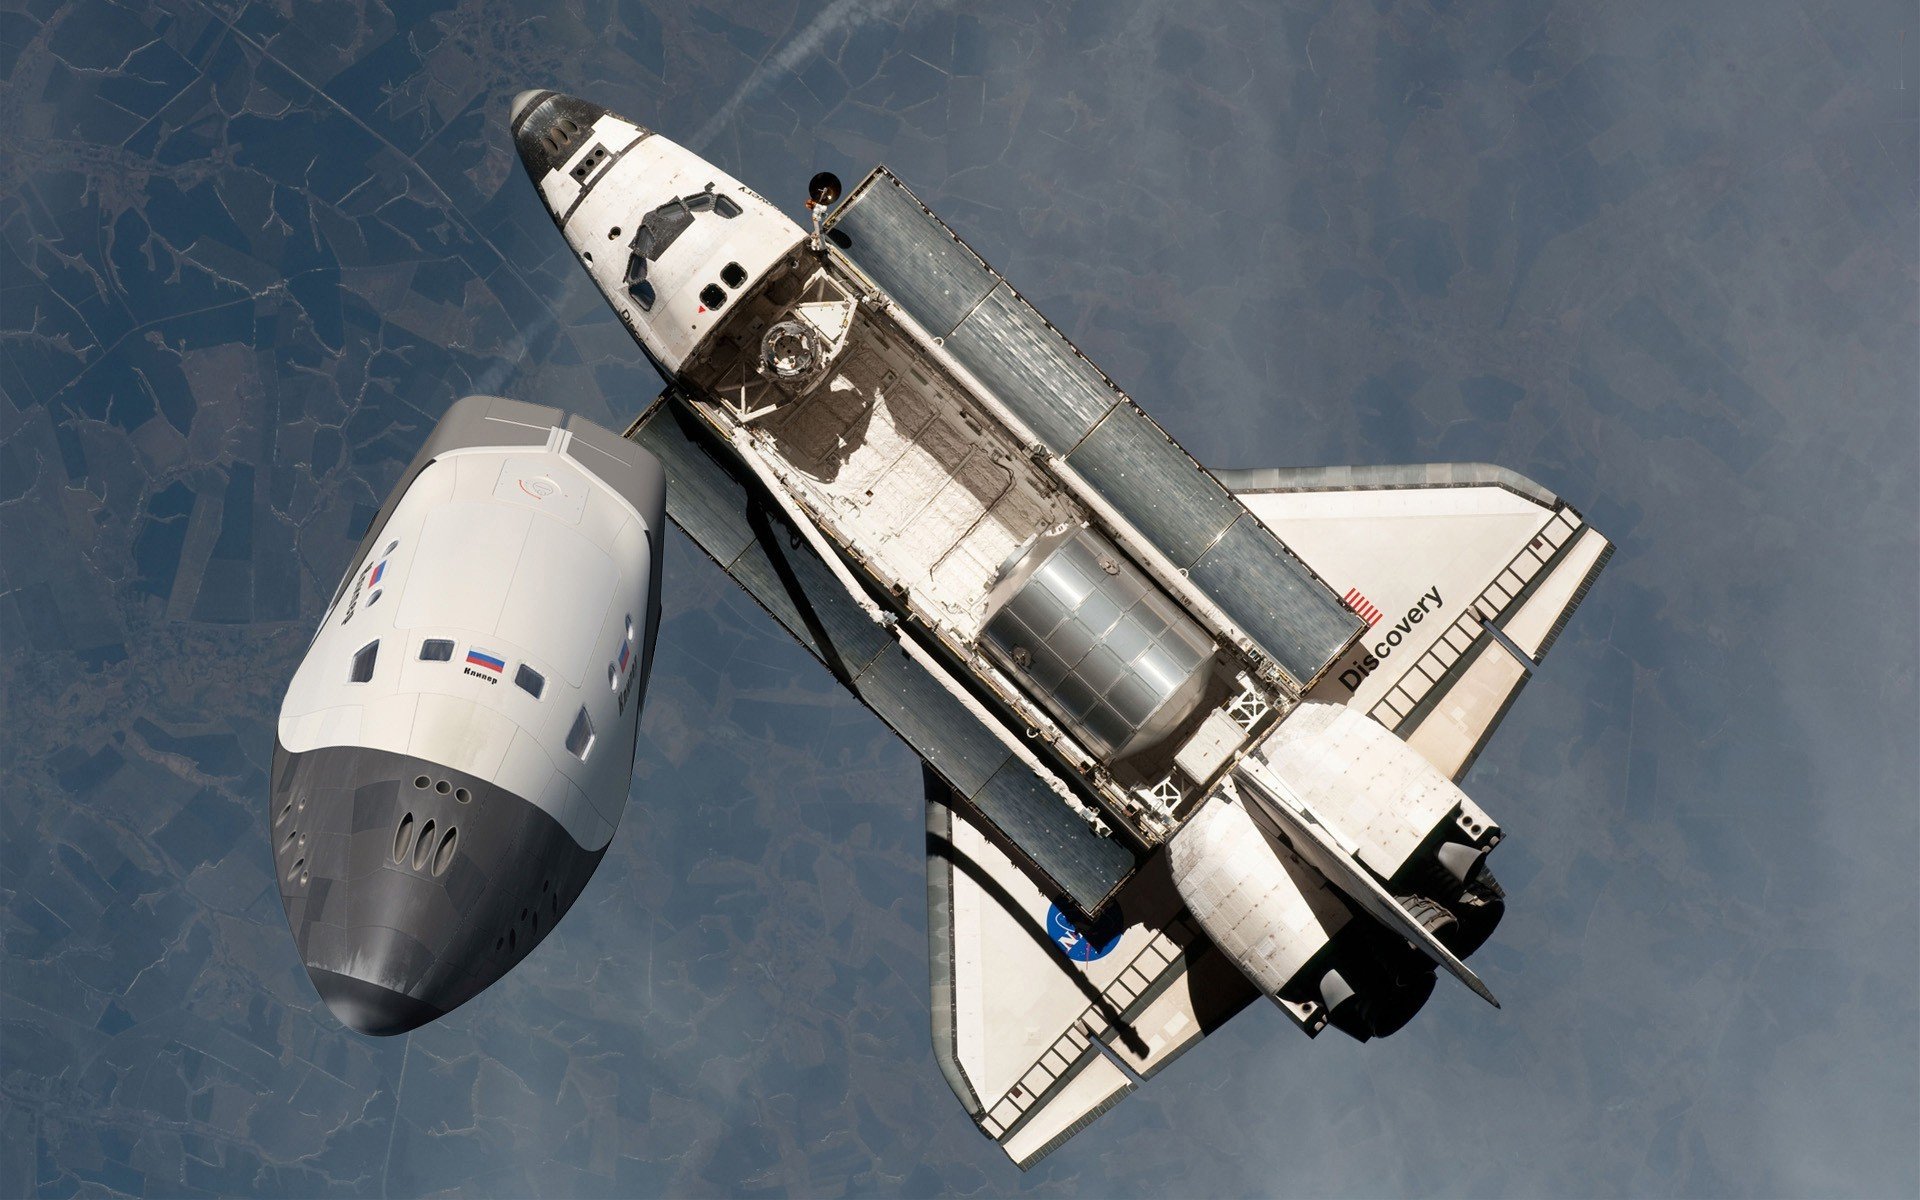 nasa space shuttle discovery